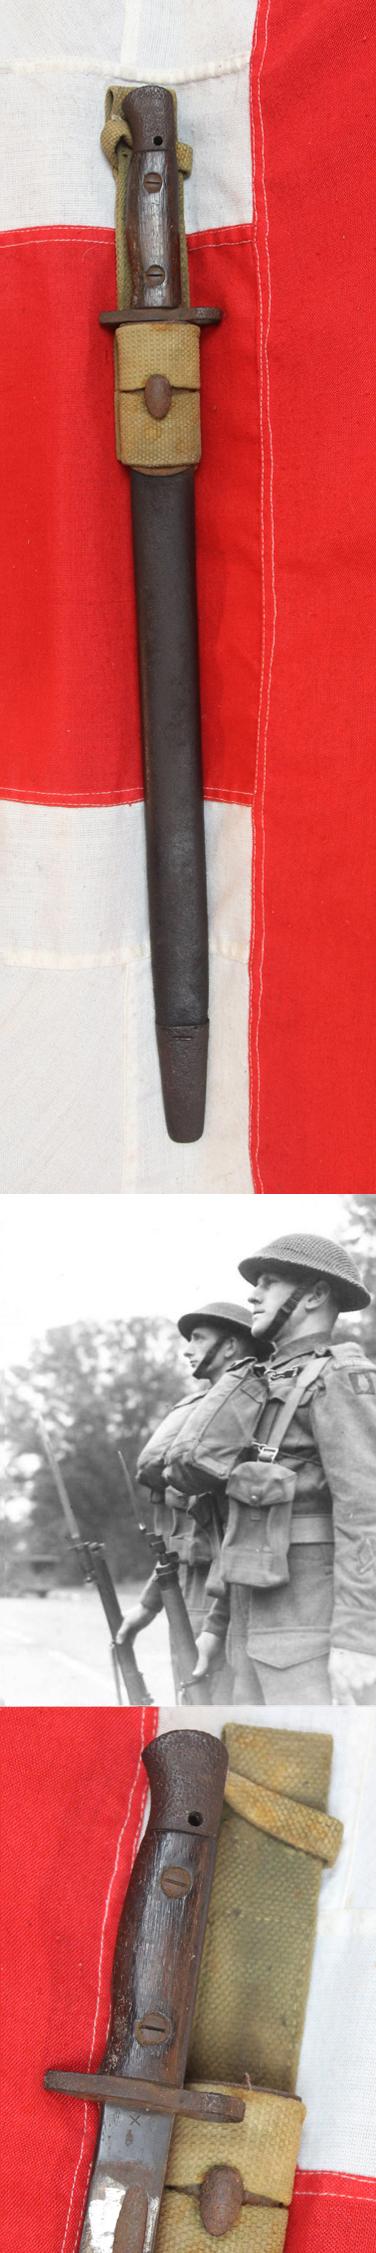 A Regular WW1 Issue .303 SMLE MK III Rifle Sword-Bayonet in Scabberd with Canvas Frog